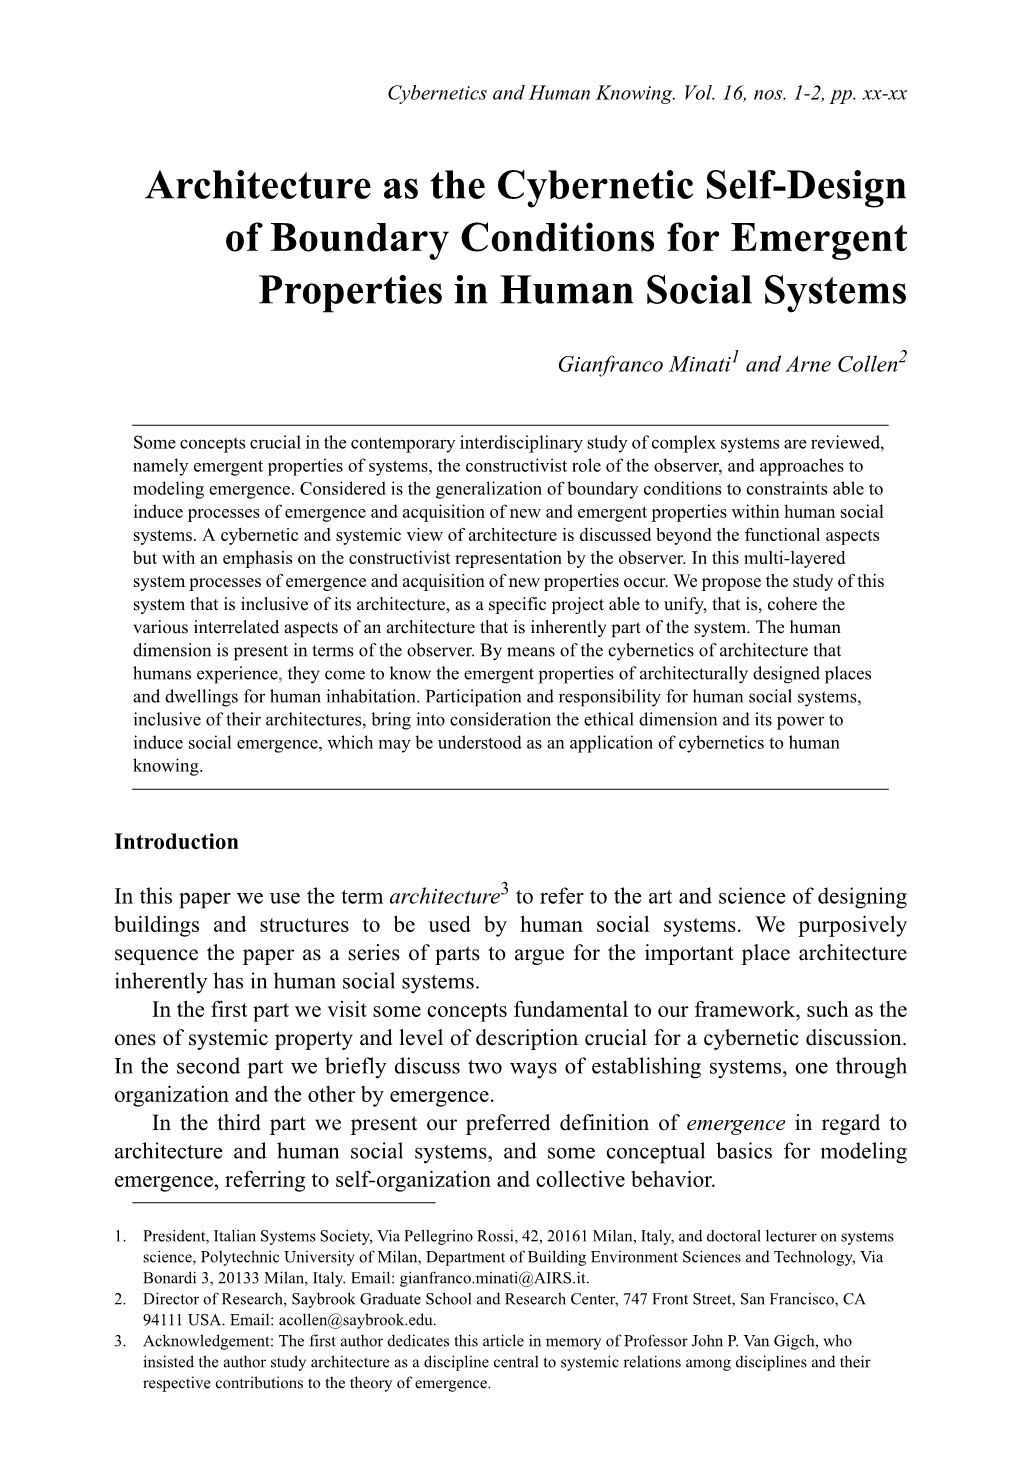 Architecture As the Cybernetic Self-Design of Boundary Conditions for Emergent Properties in Human Social Systems